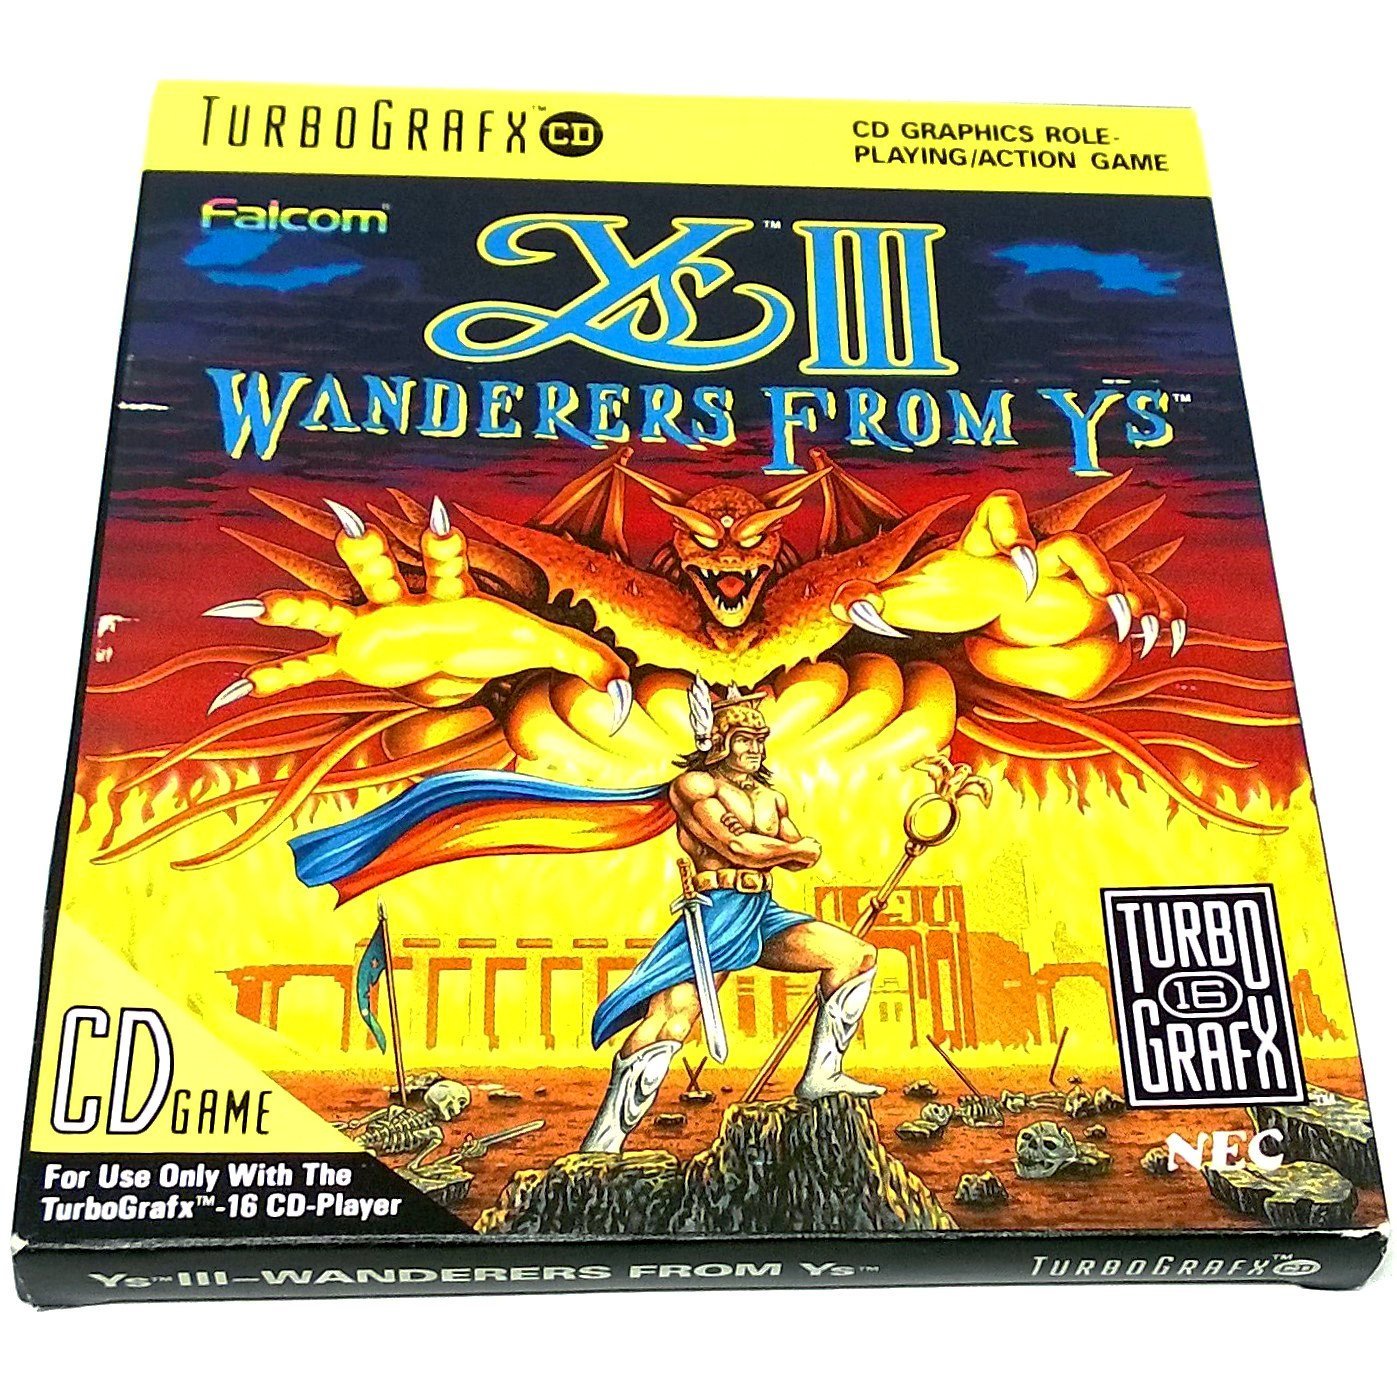 Ys III: Wanderers from Ys for TurboGrafx-16 CD - Front of box